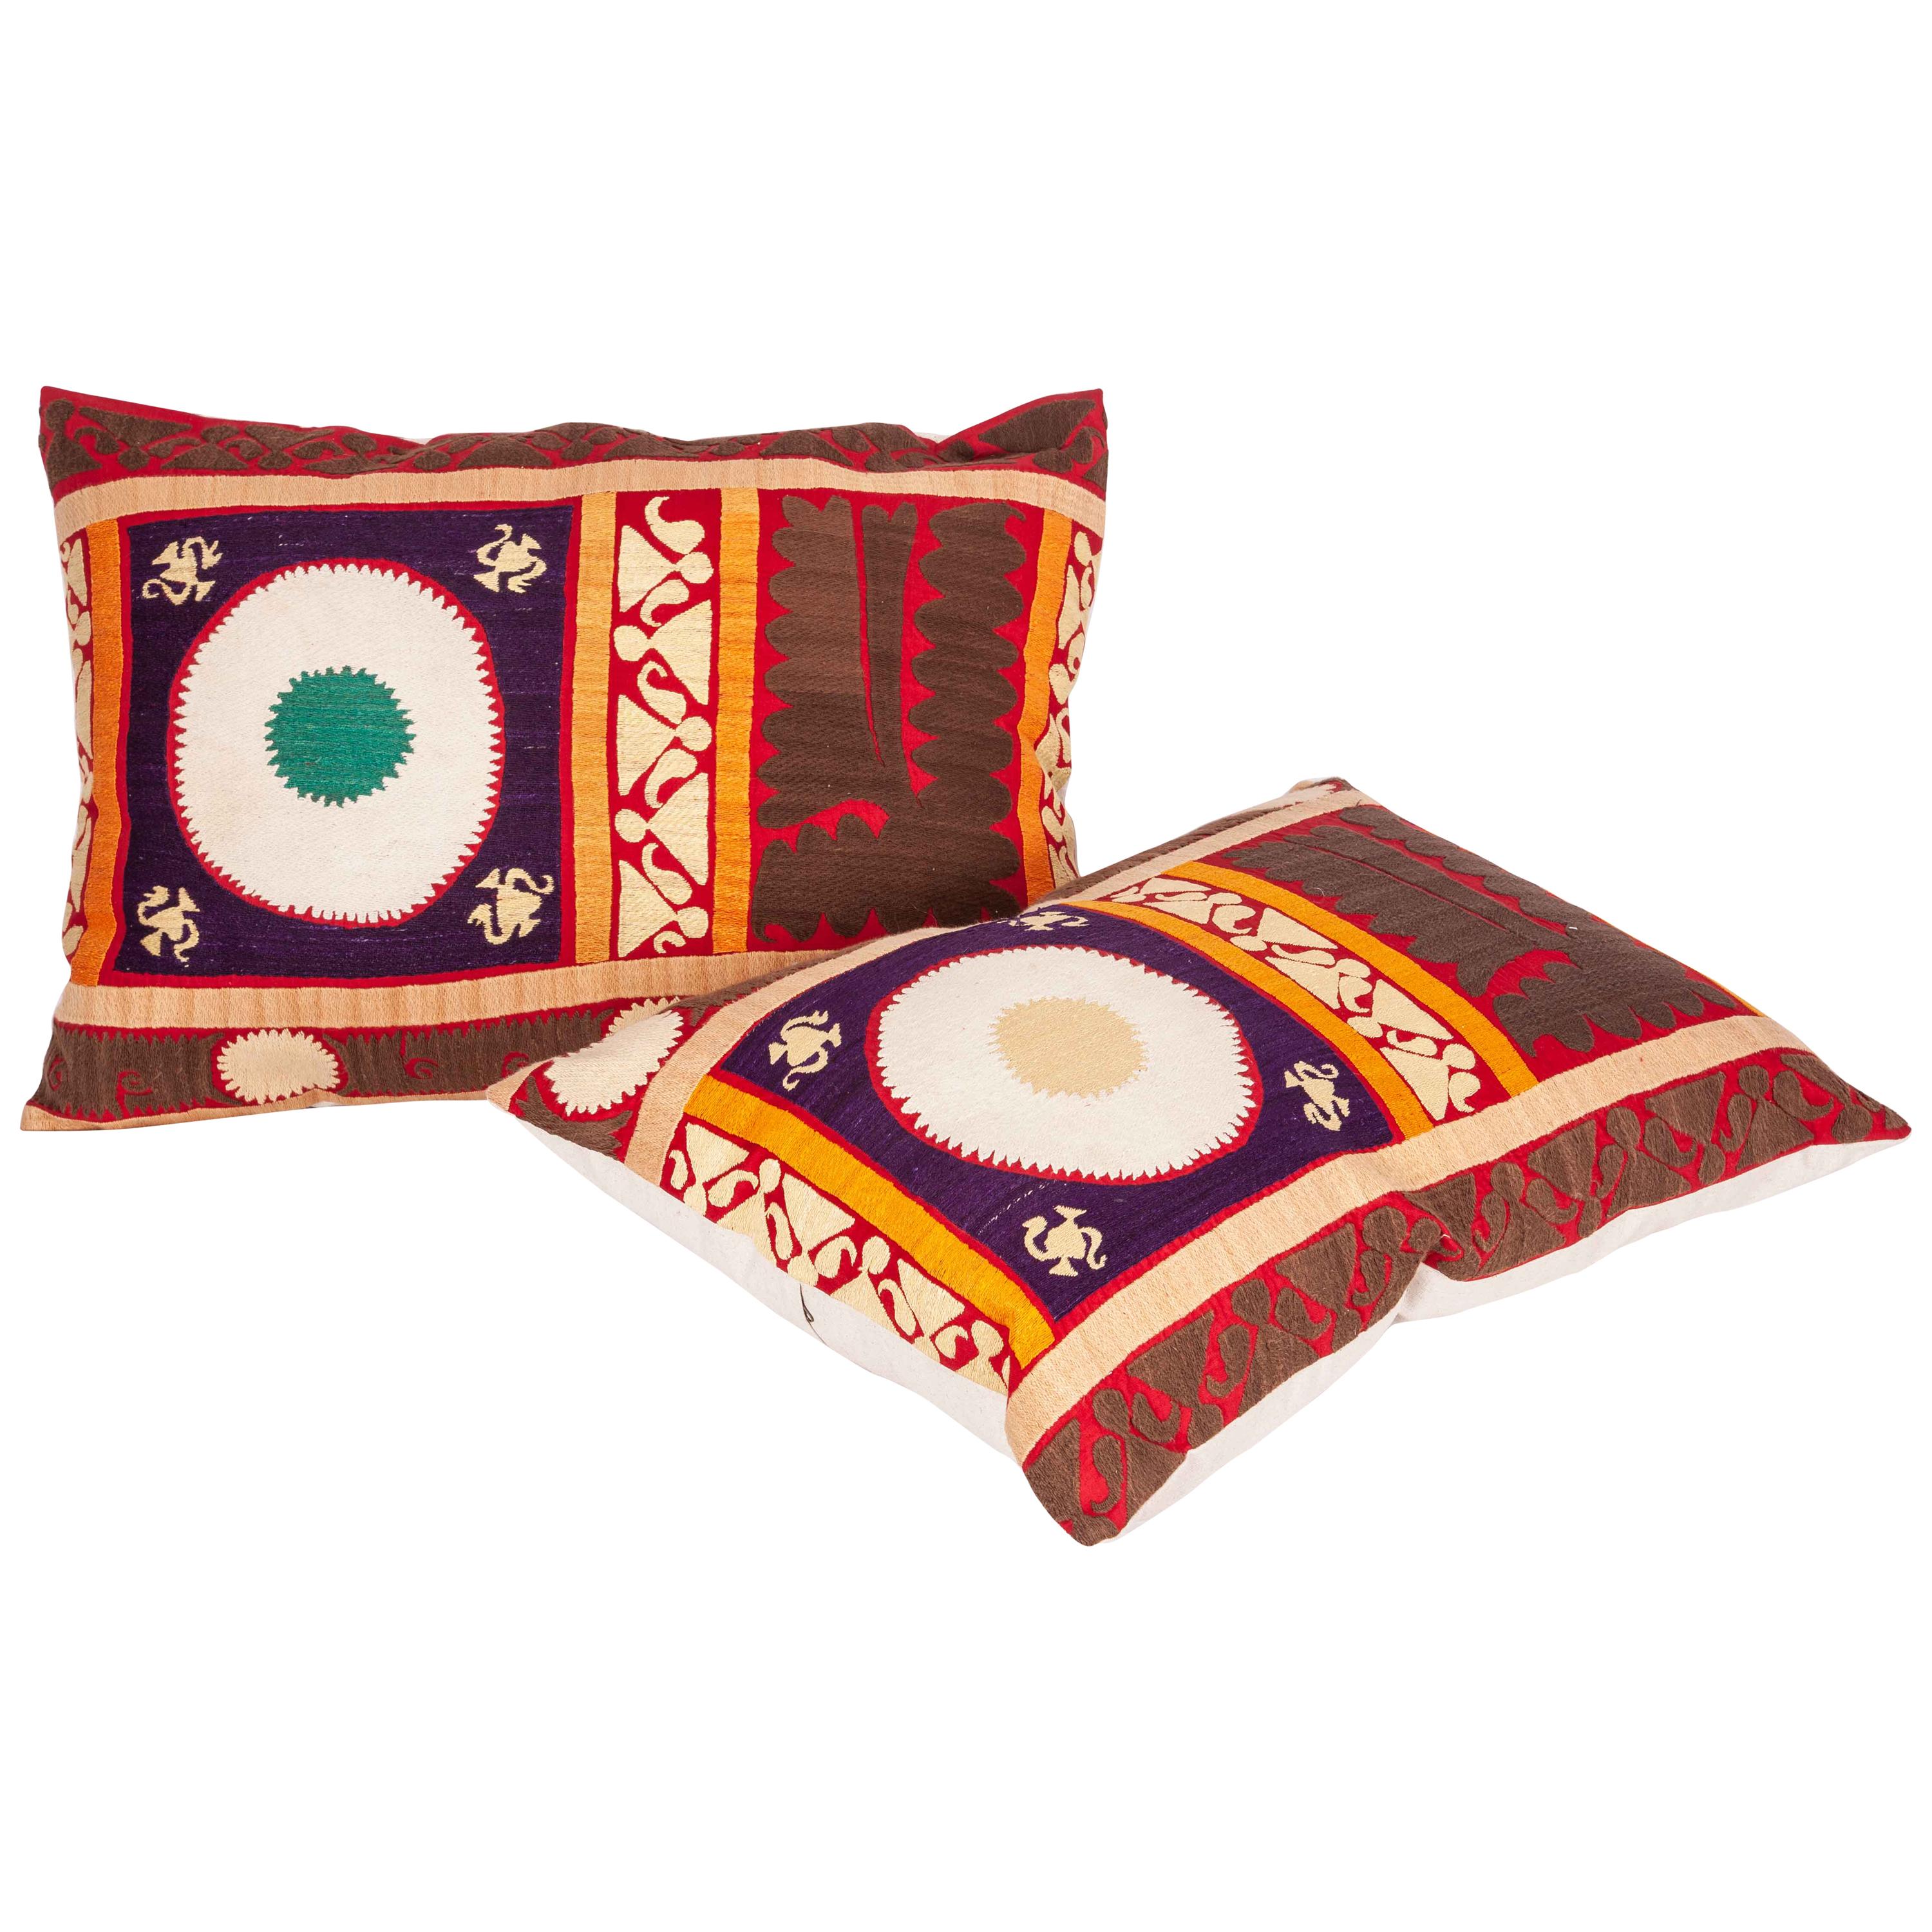 Vintage Suzani Pillow Cases, Cushion Covers, Mid-20th Century